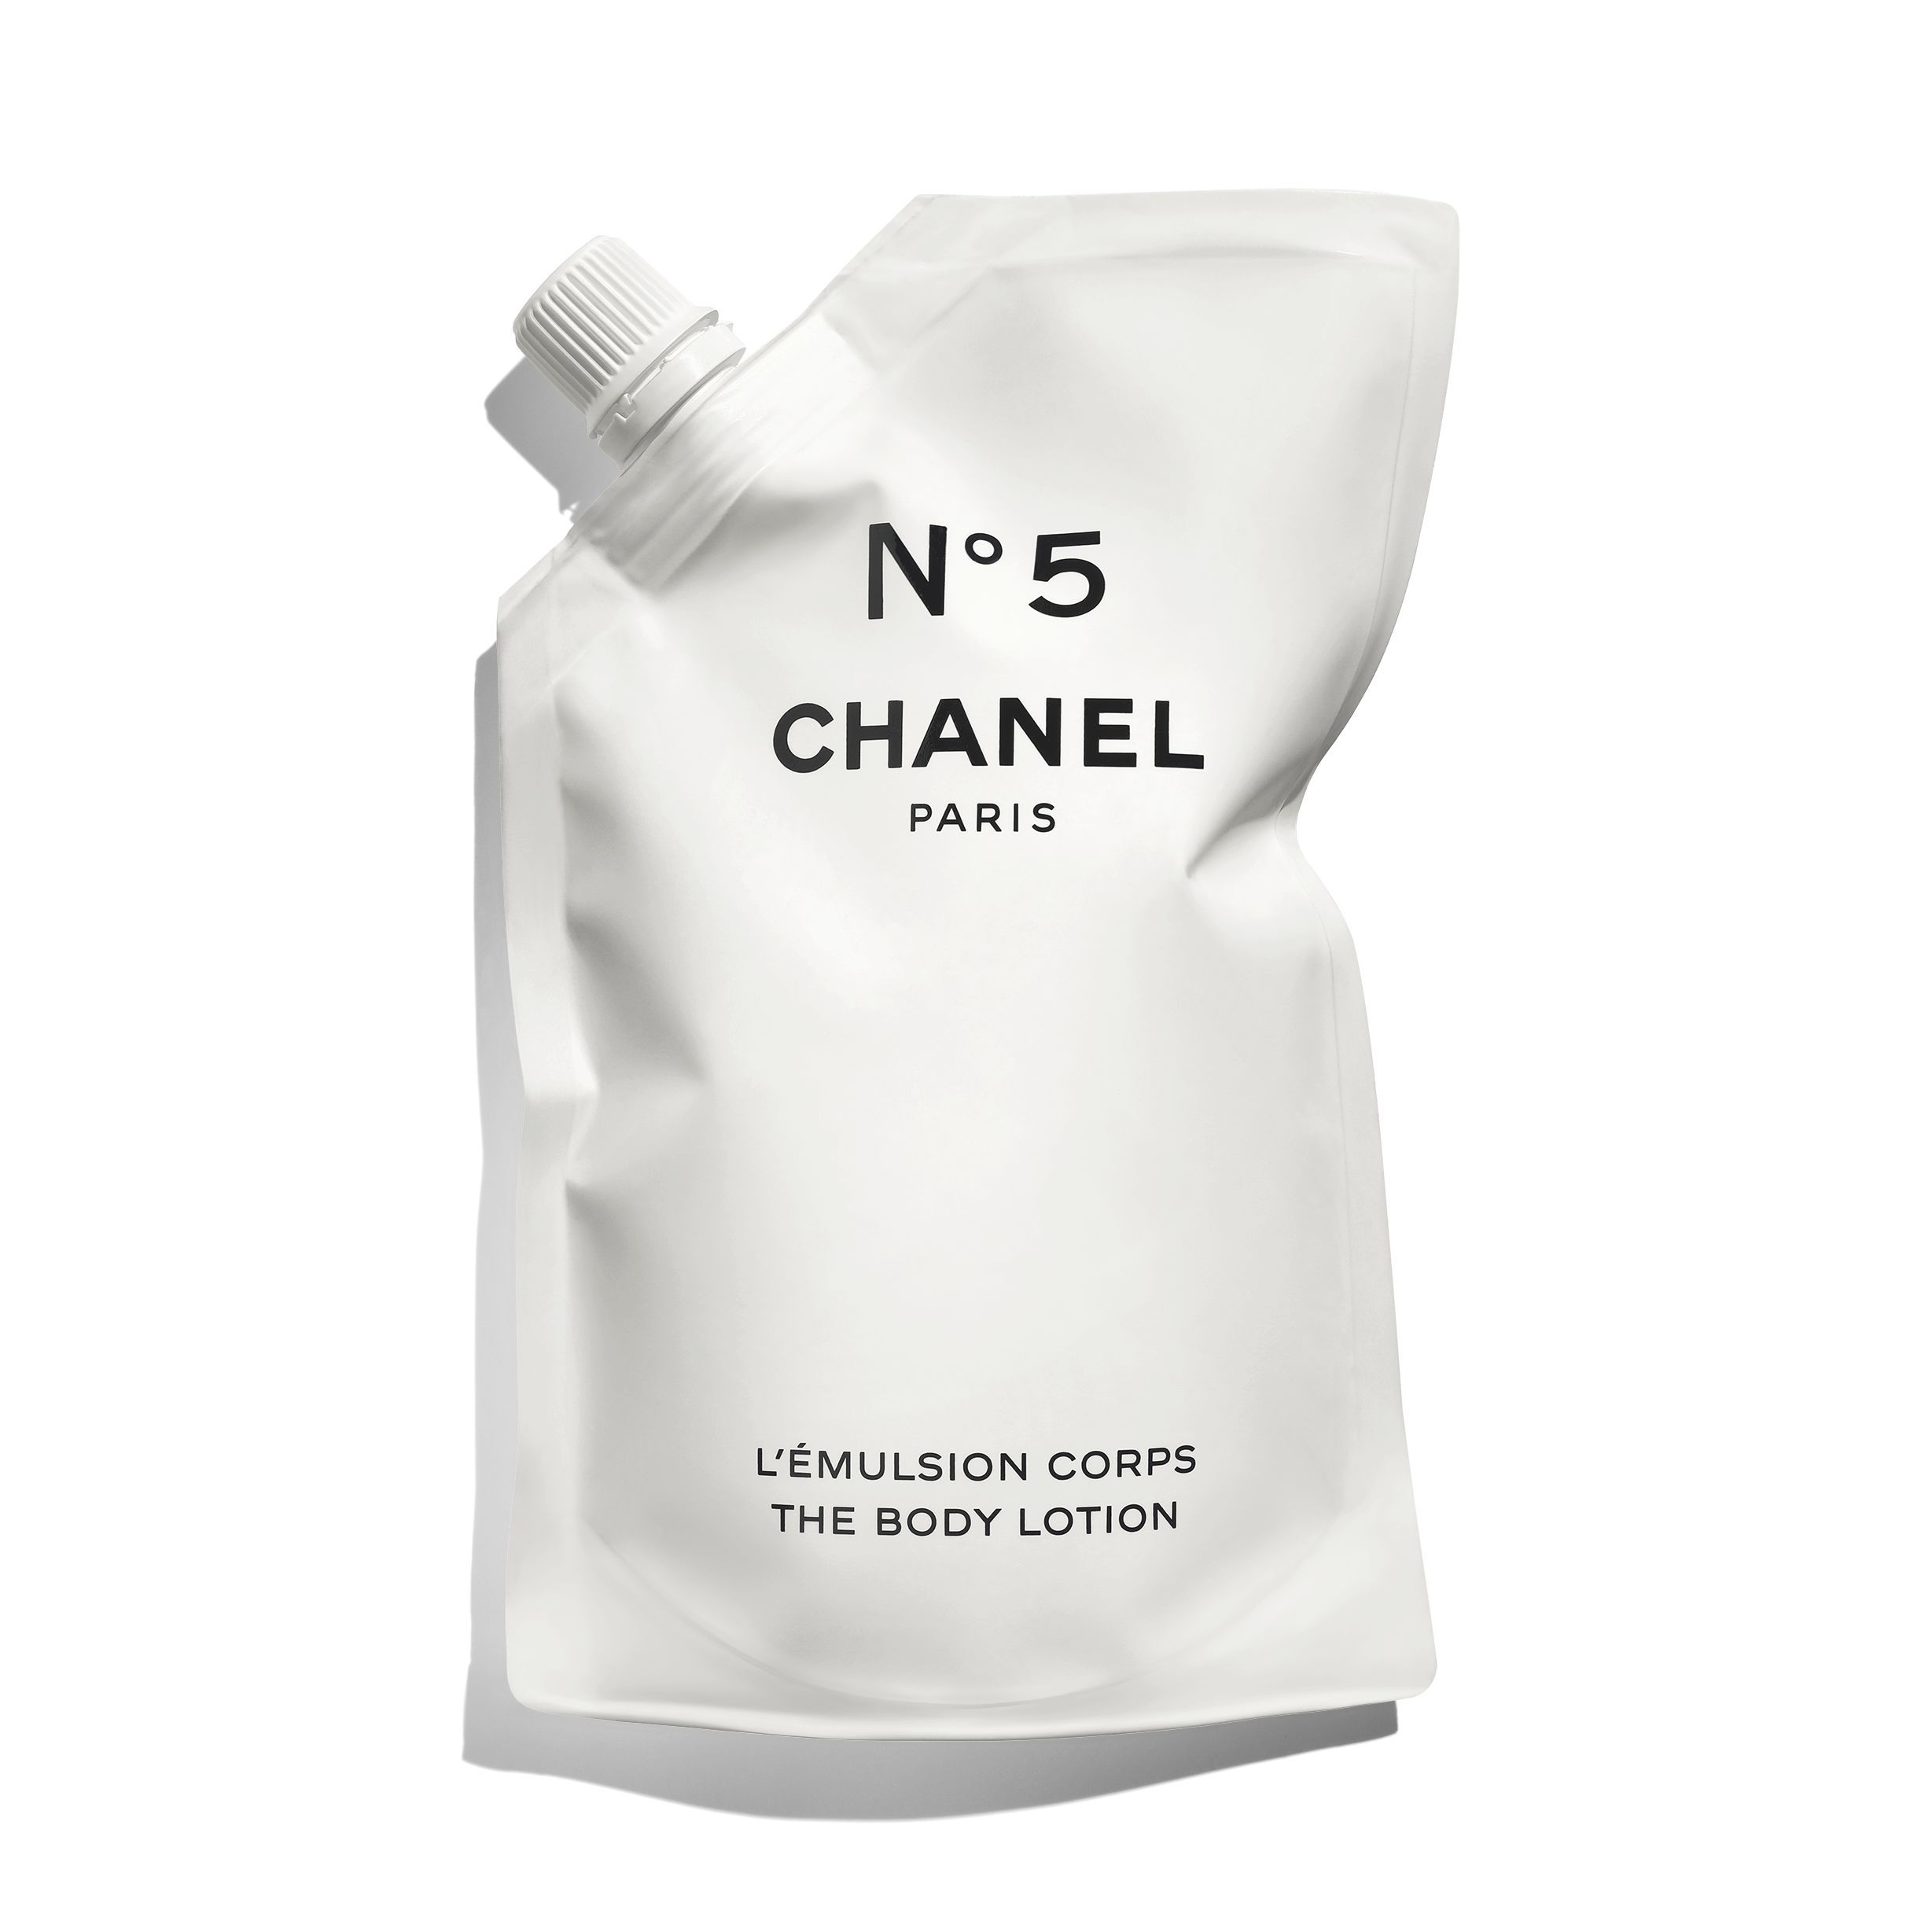 CHANEL Factory 5 - Limited-time limited-edition collection | CHANEL | Chanel, Inc. (US)